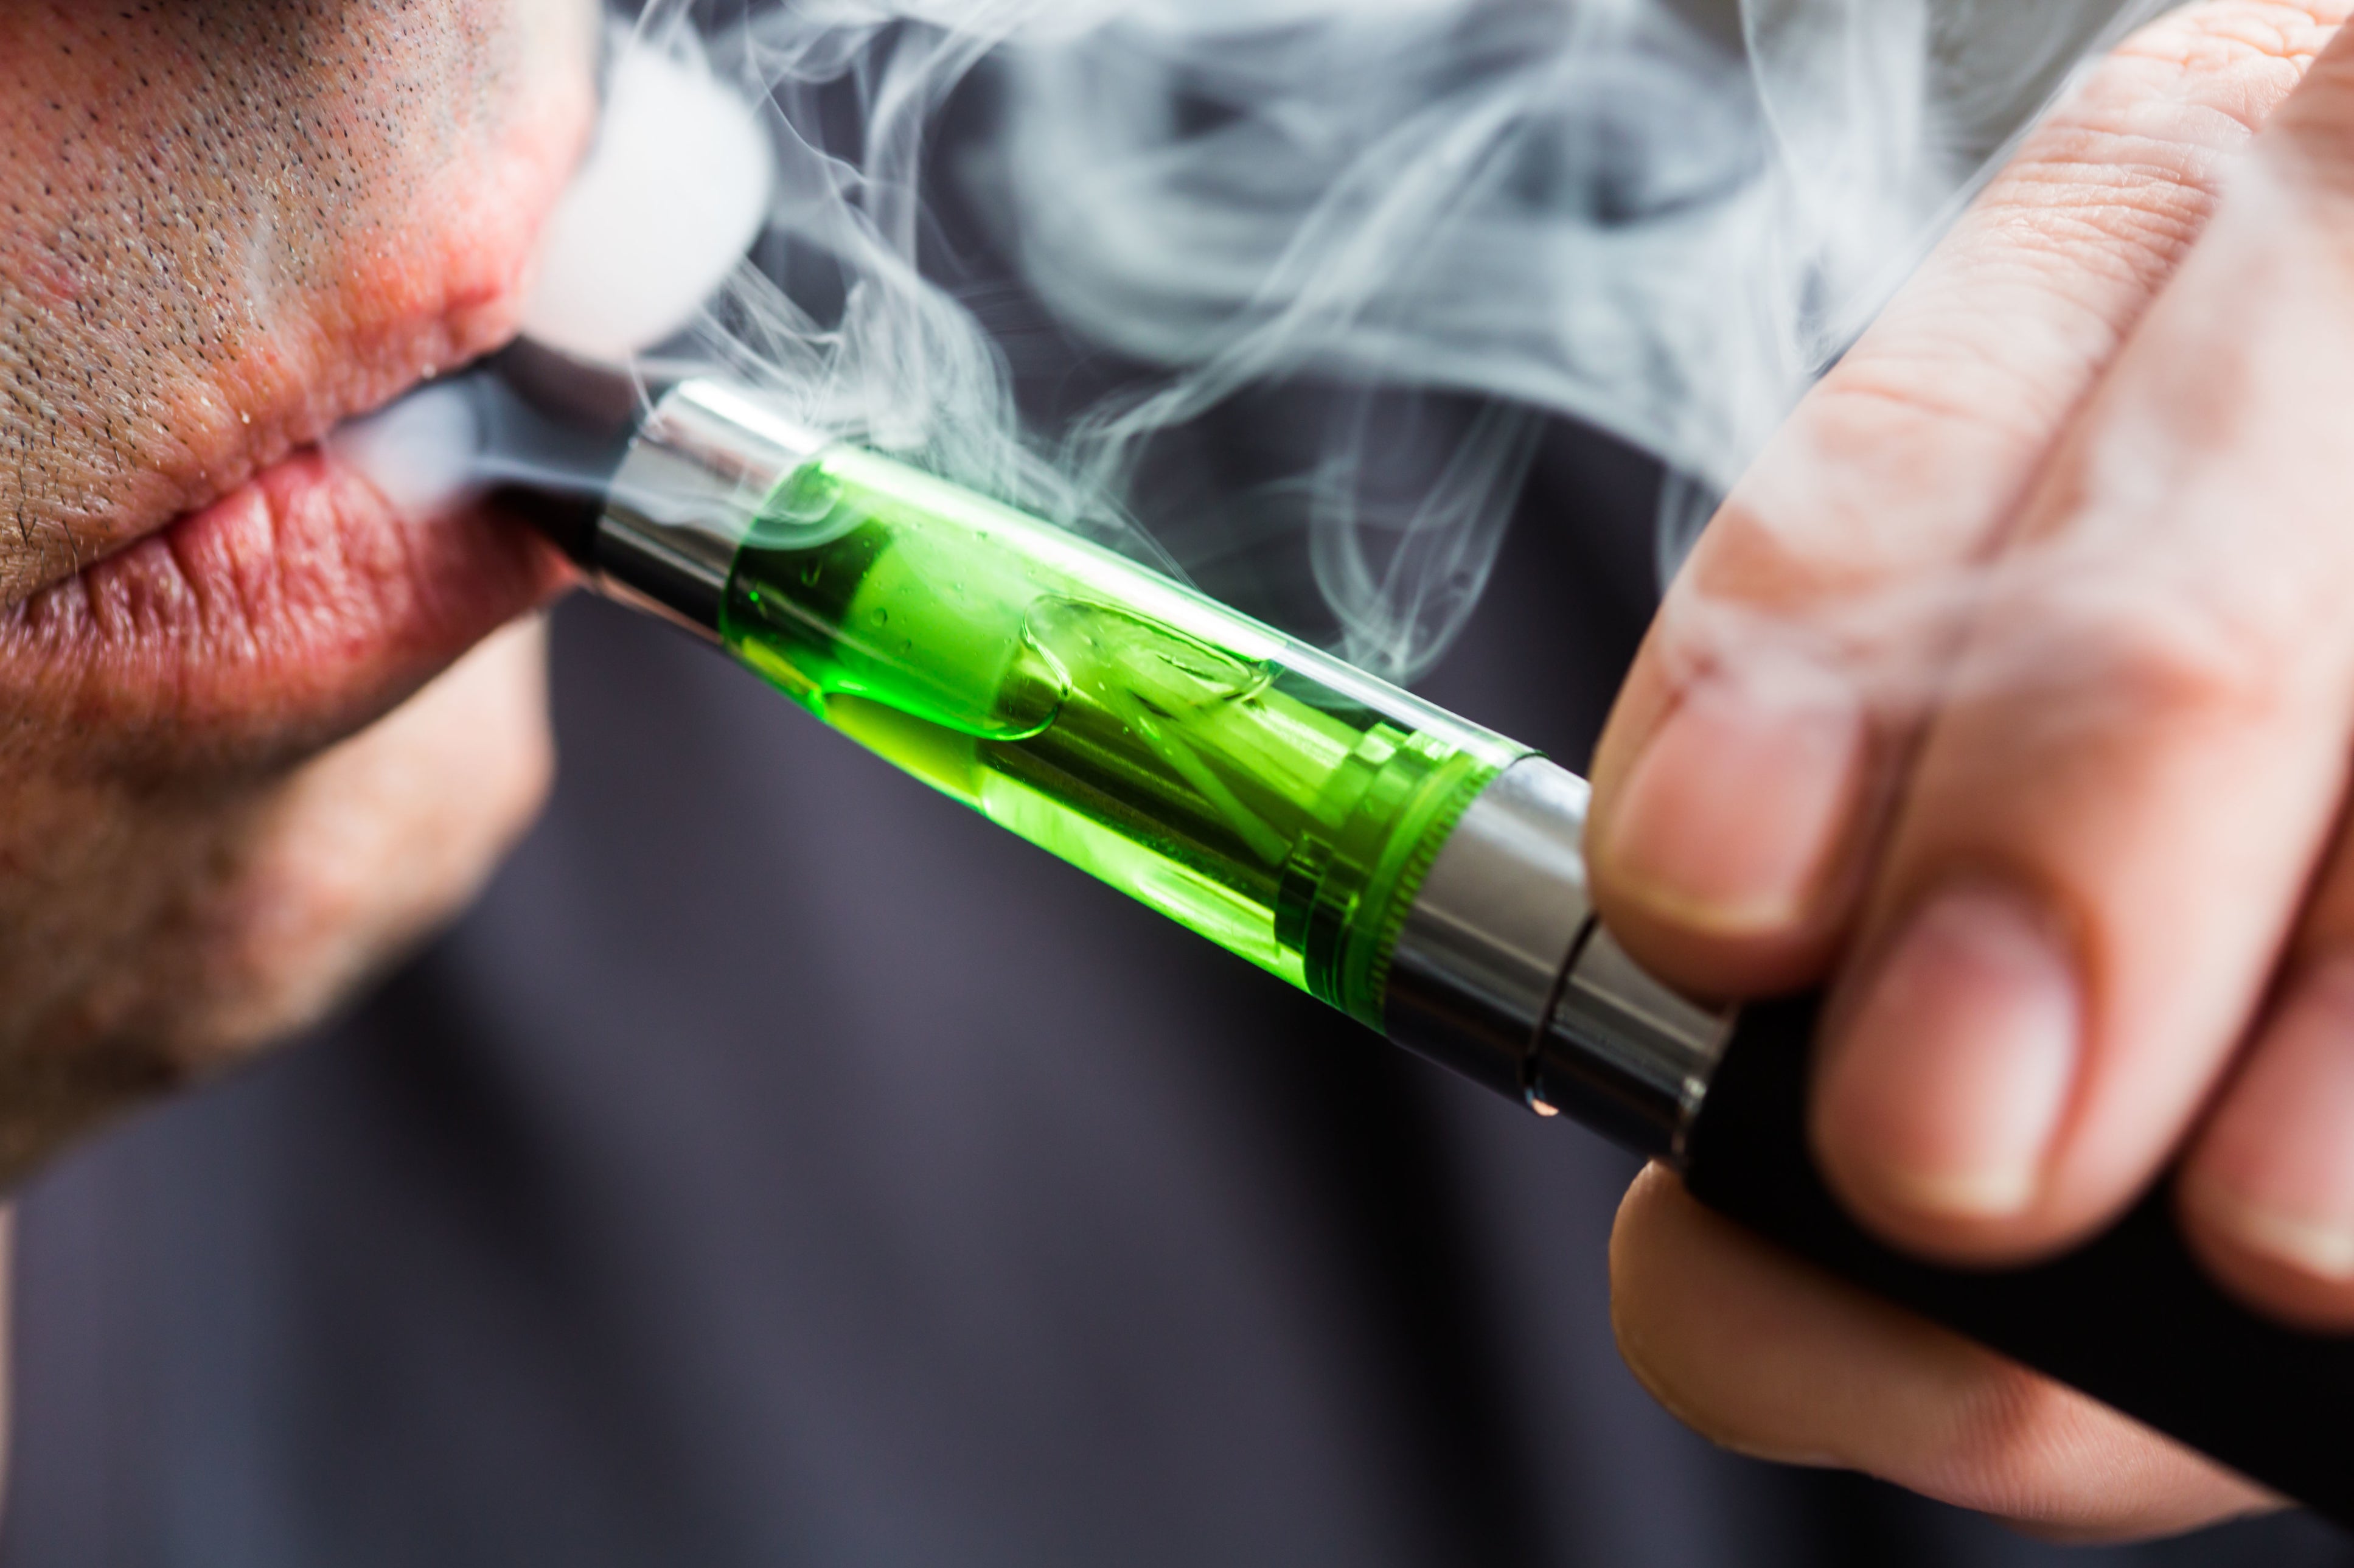 Why Are Young People More Attracted Towards Vaping?